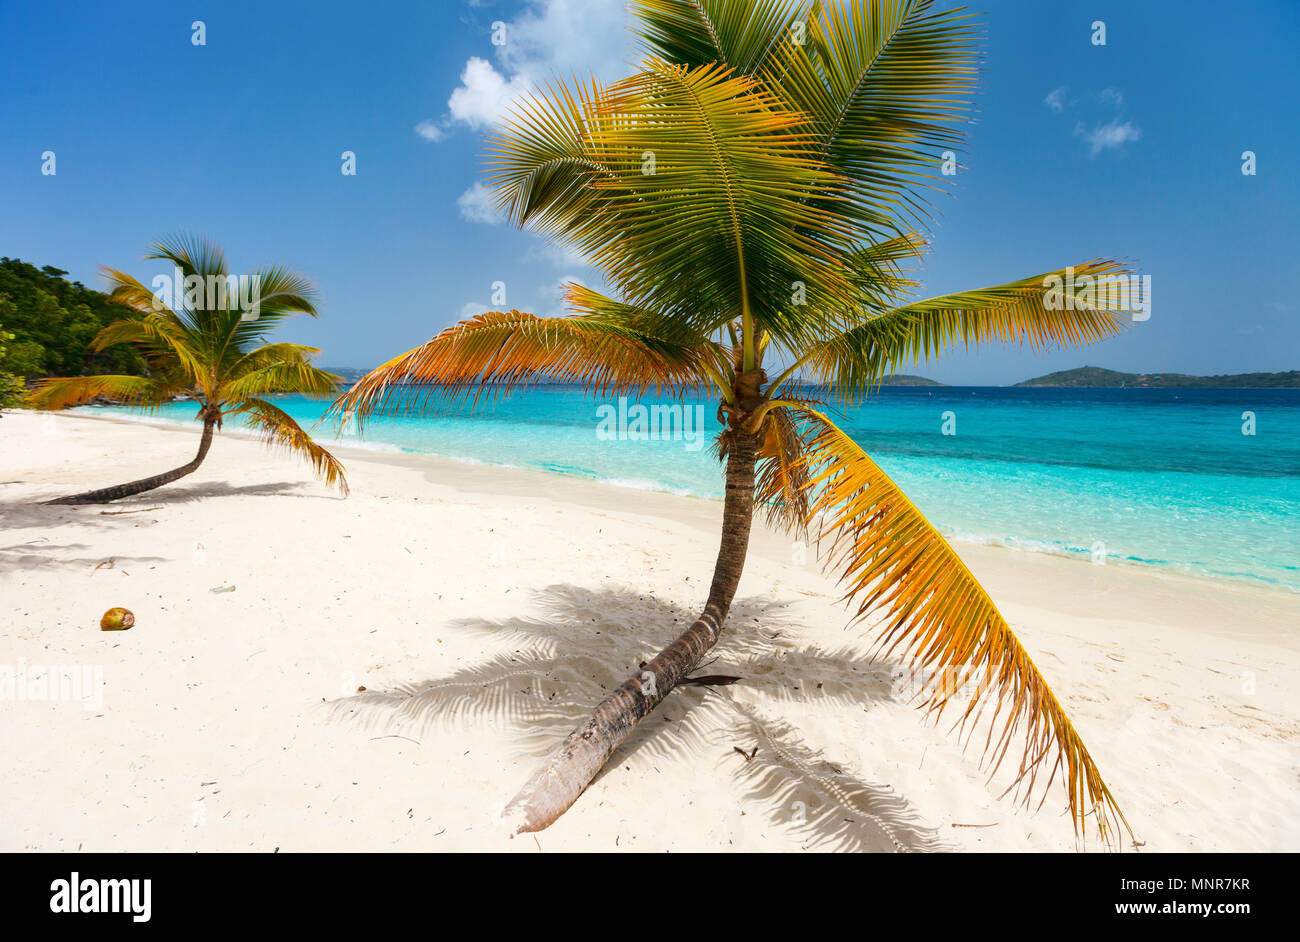 Beautiful tropical beach with palm trees, white sand, turquoise ocean water and blue sky on St John, US Virgin Islands in Caribbean Stock Photo